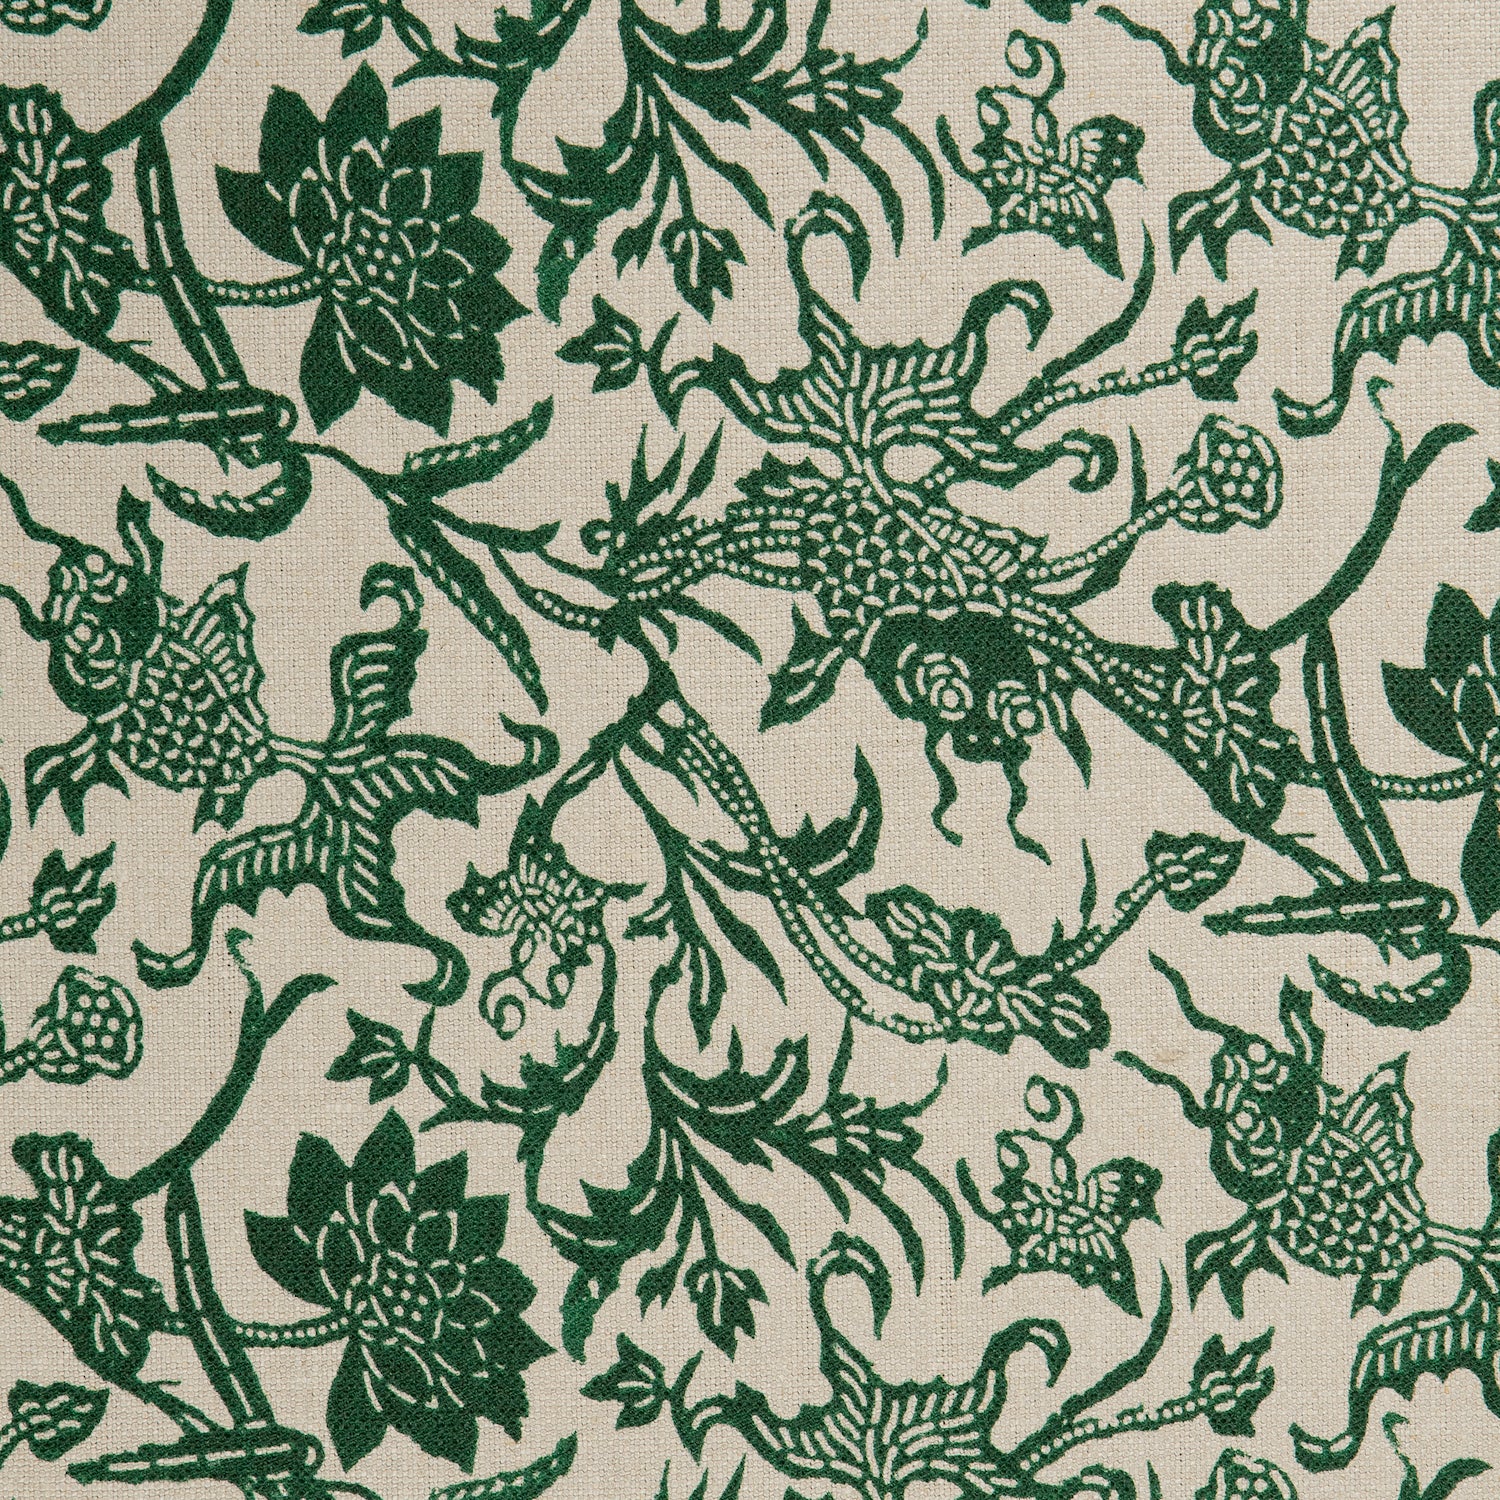 Detail of a linen fabric in a carp and leaf pattern in green on a beige field.